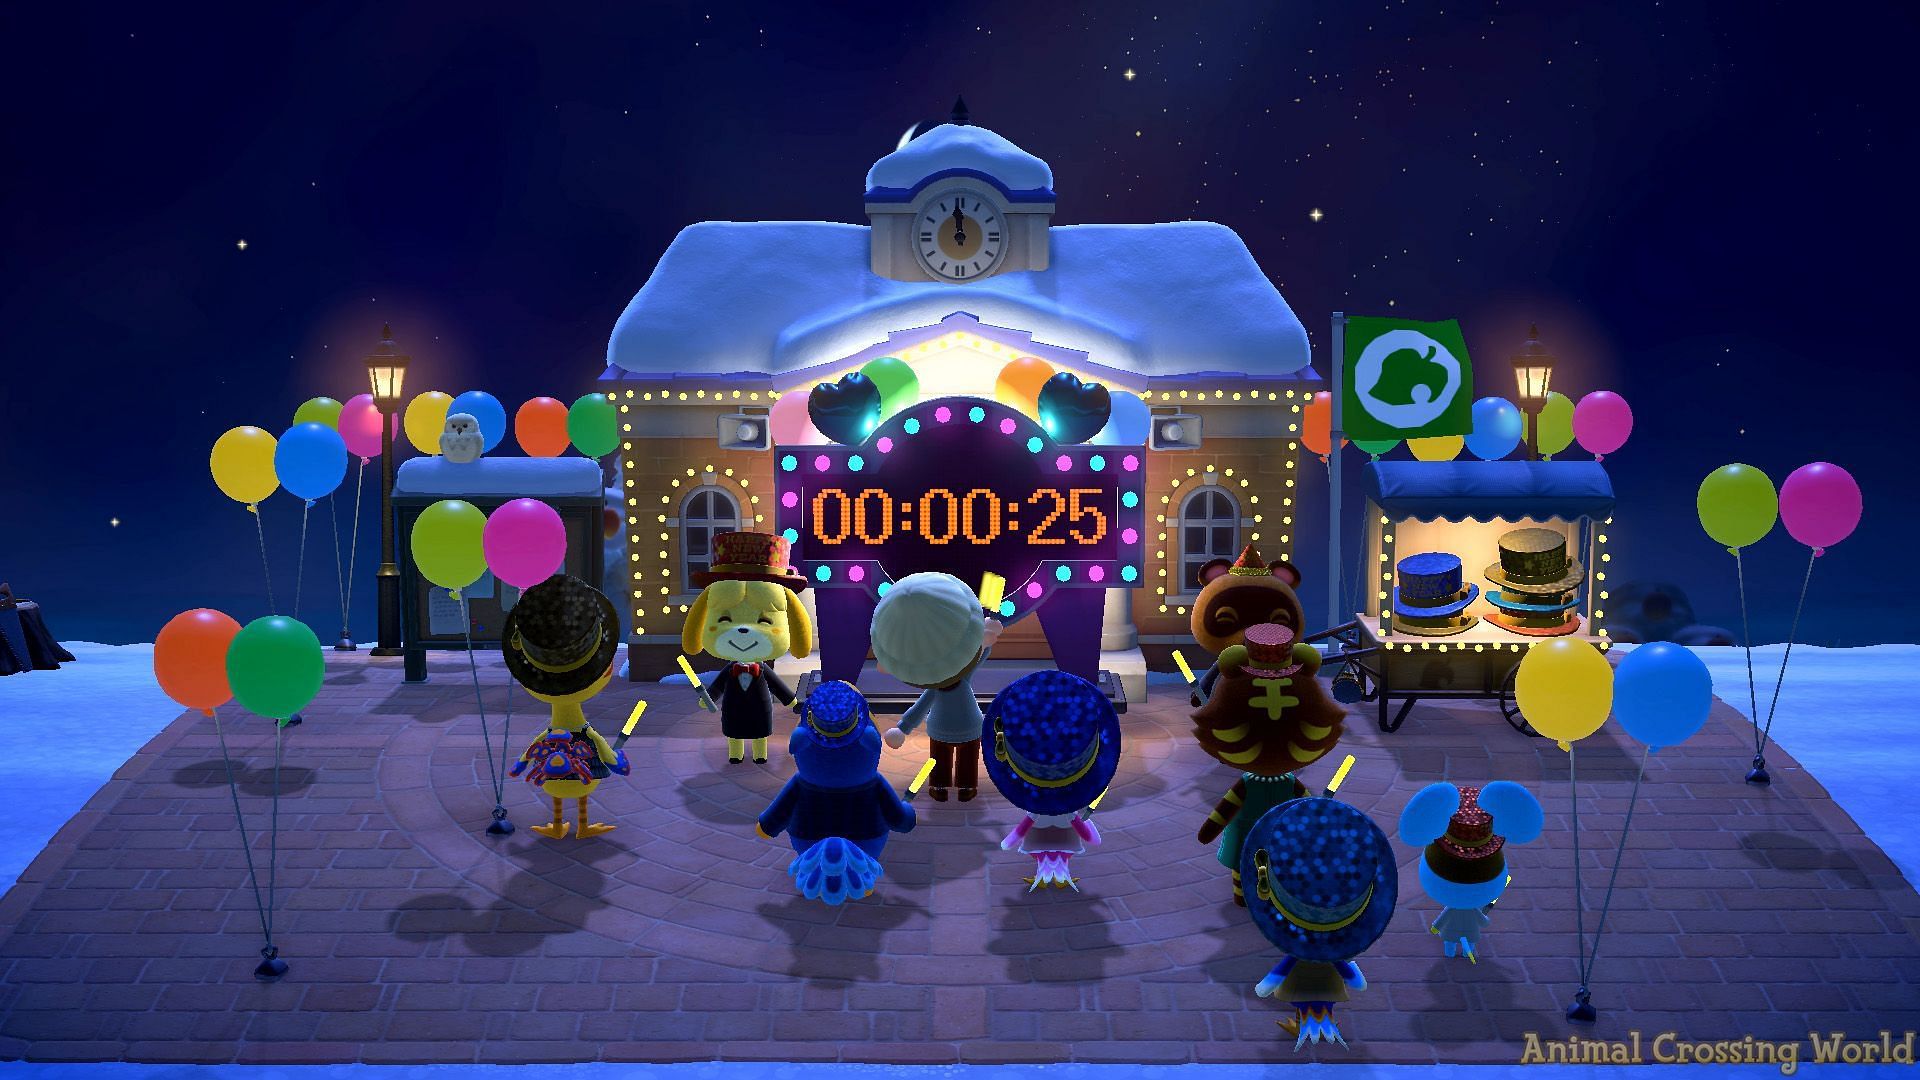 The countdown is one of the most anticipated events of the year (Image via Animal Crossing World)